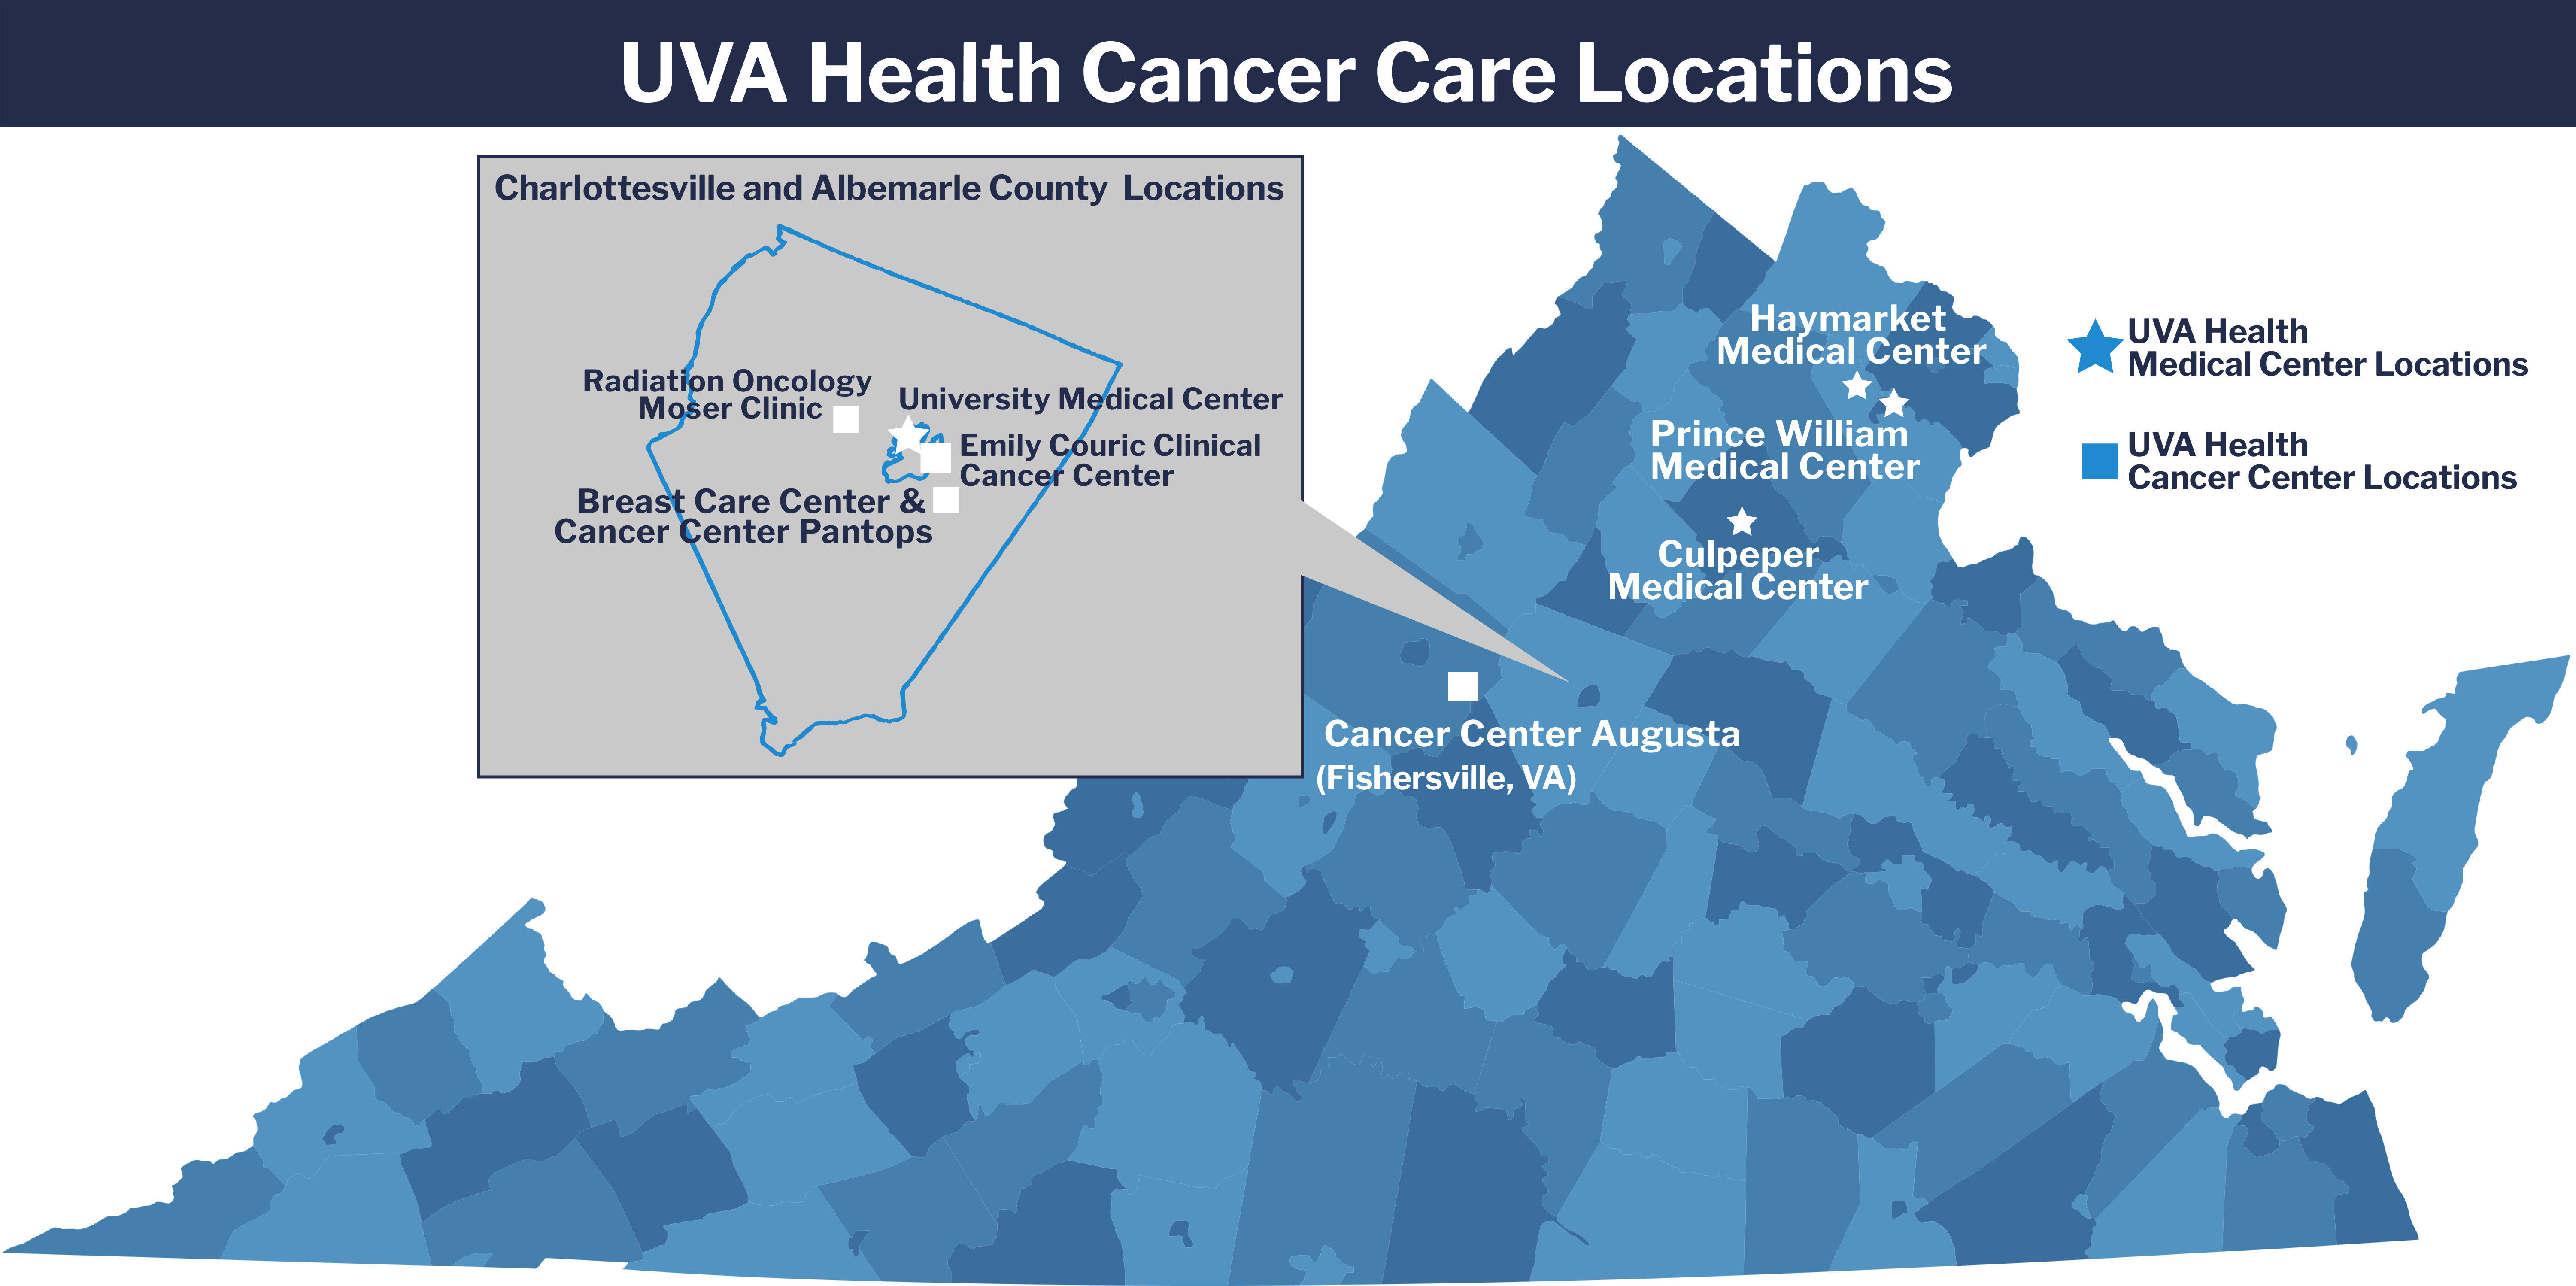 map of Virginia with UVA Cancer centers identified 